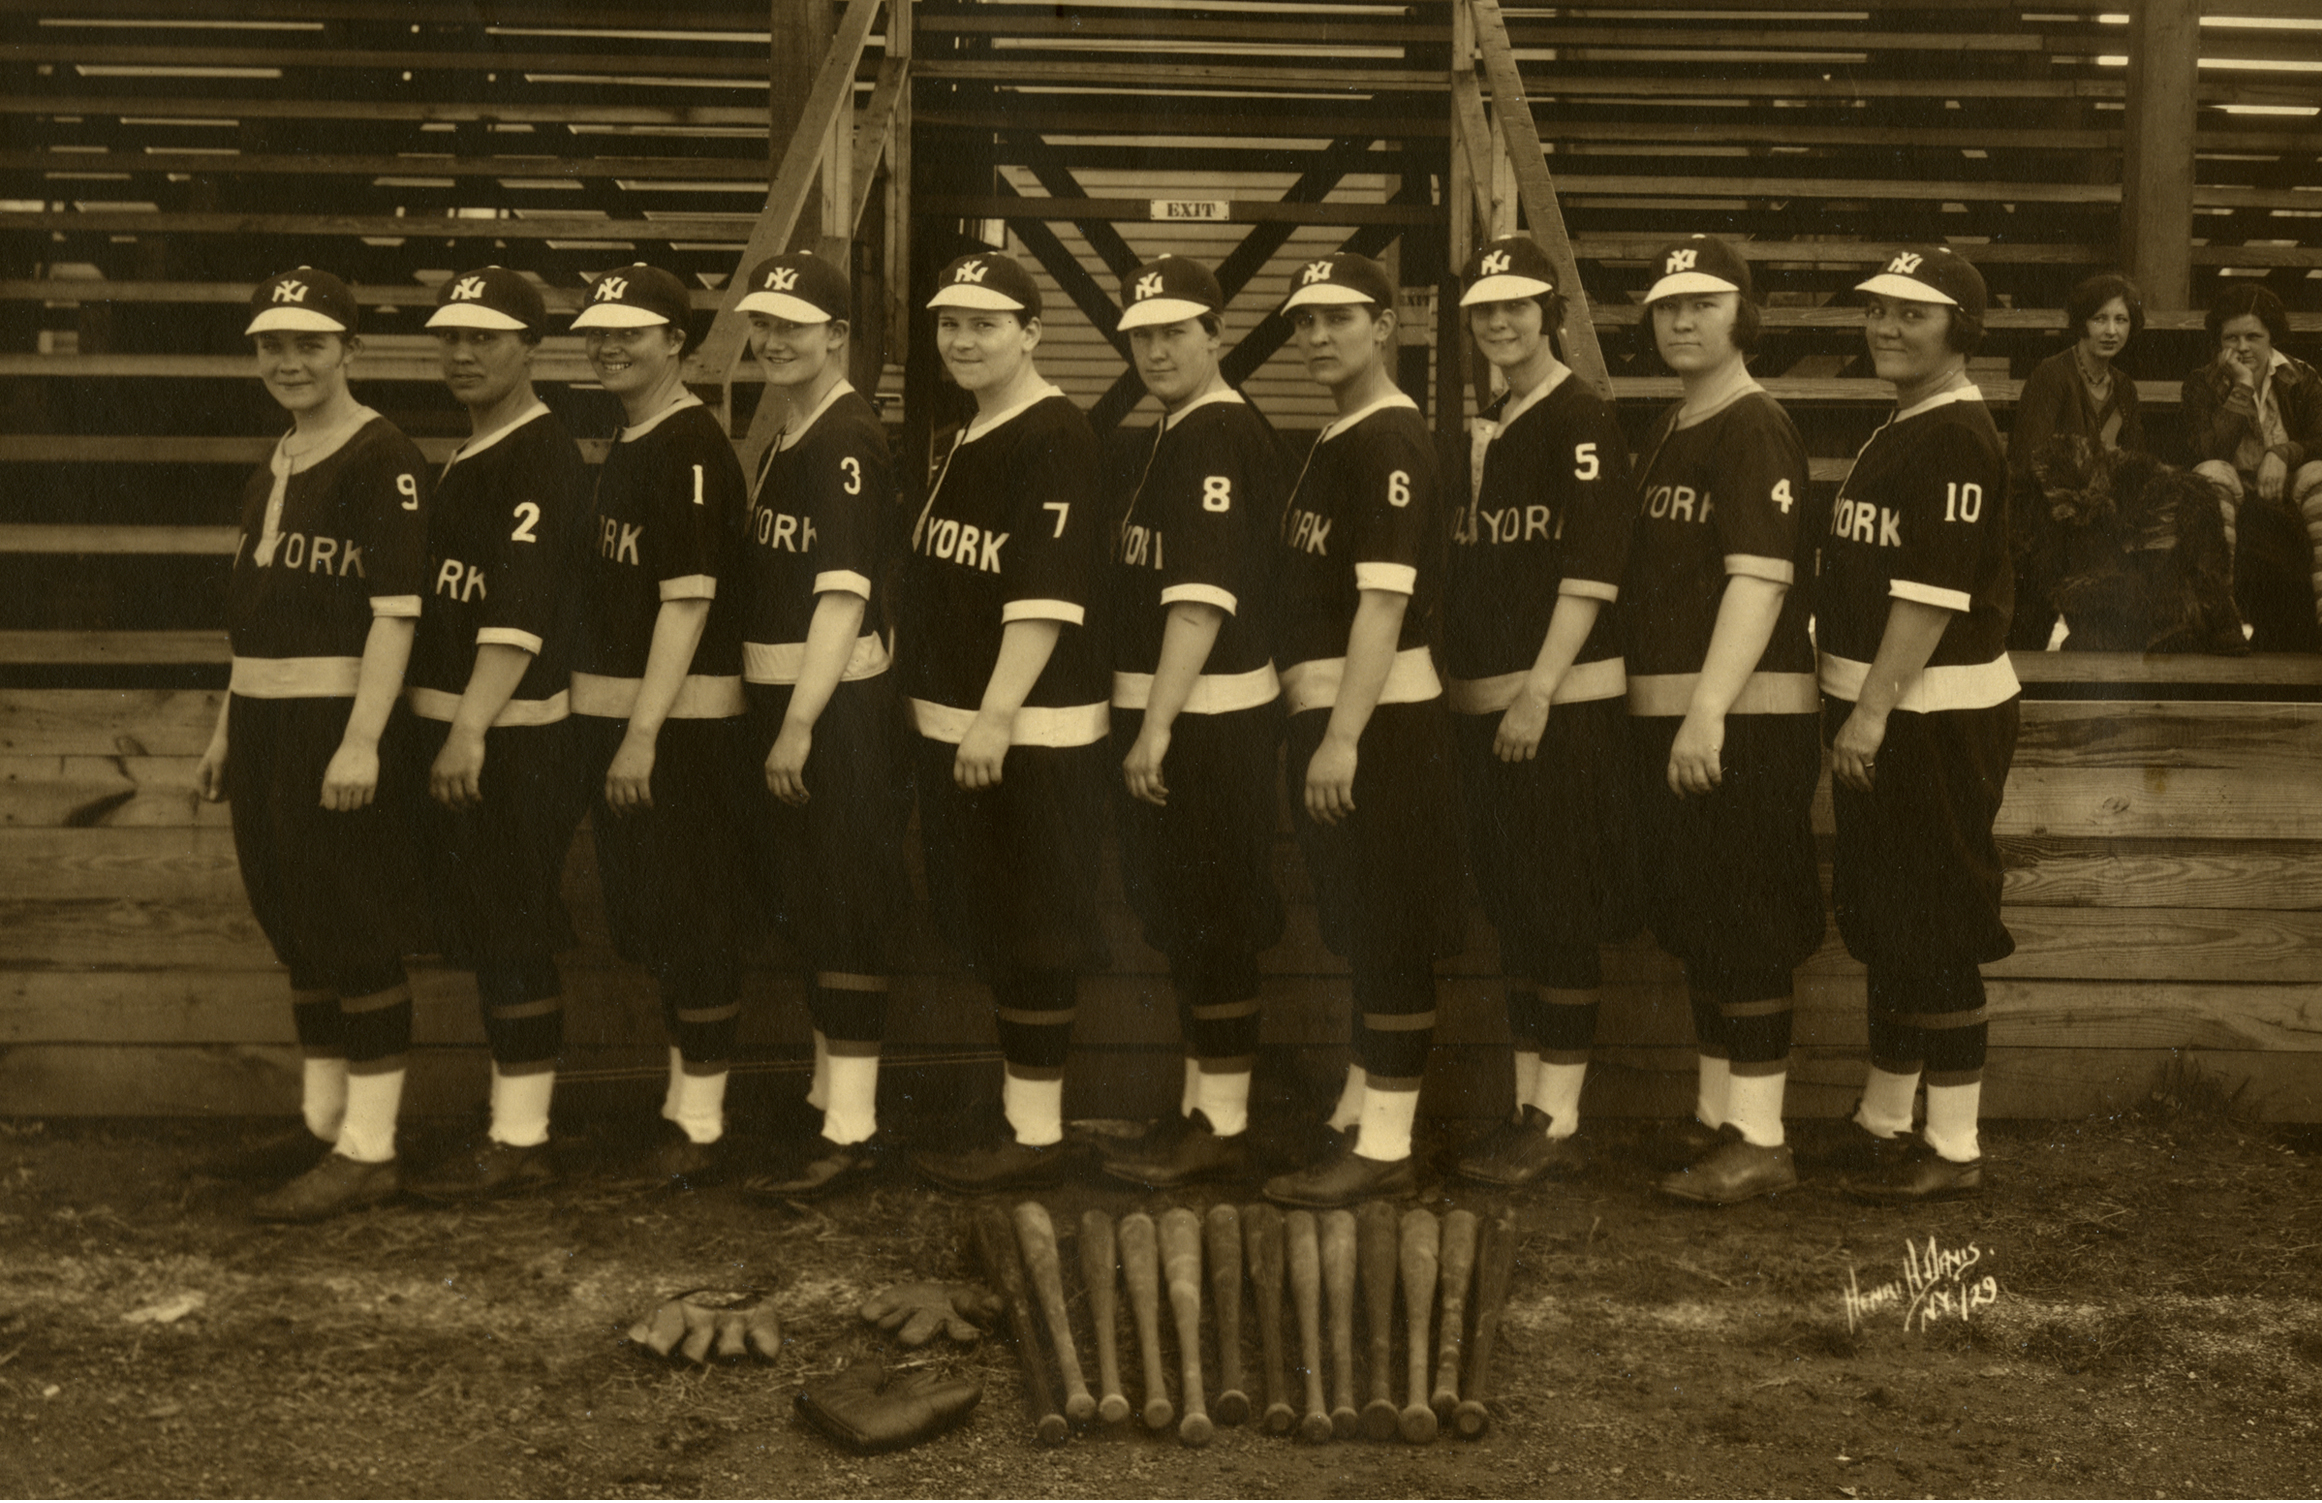 Billed as the  female champions of the world,  Margaret Nabel (far right) and the New York Bloomer Girls promoted their barnstorming tours by sending out team photos such as this picture of the 1929 club.